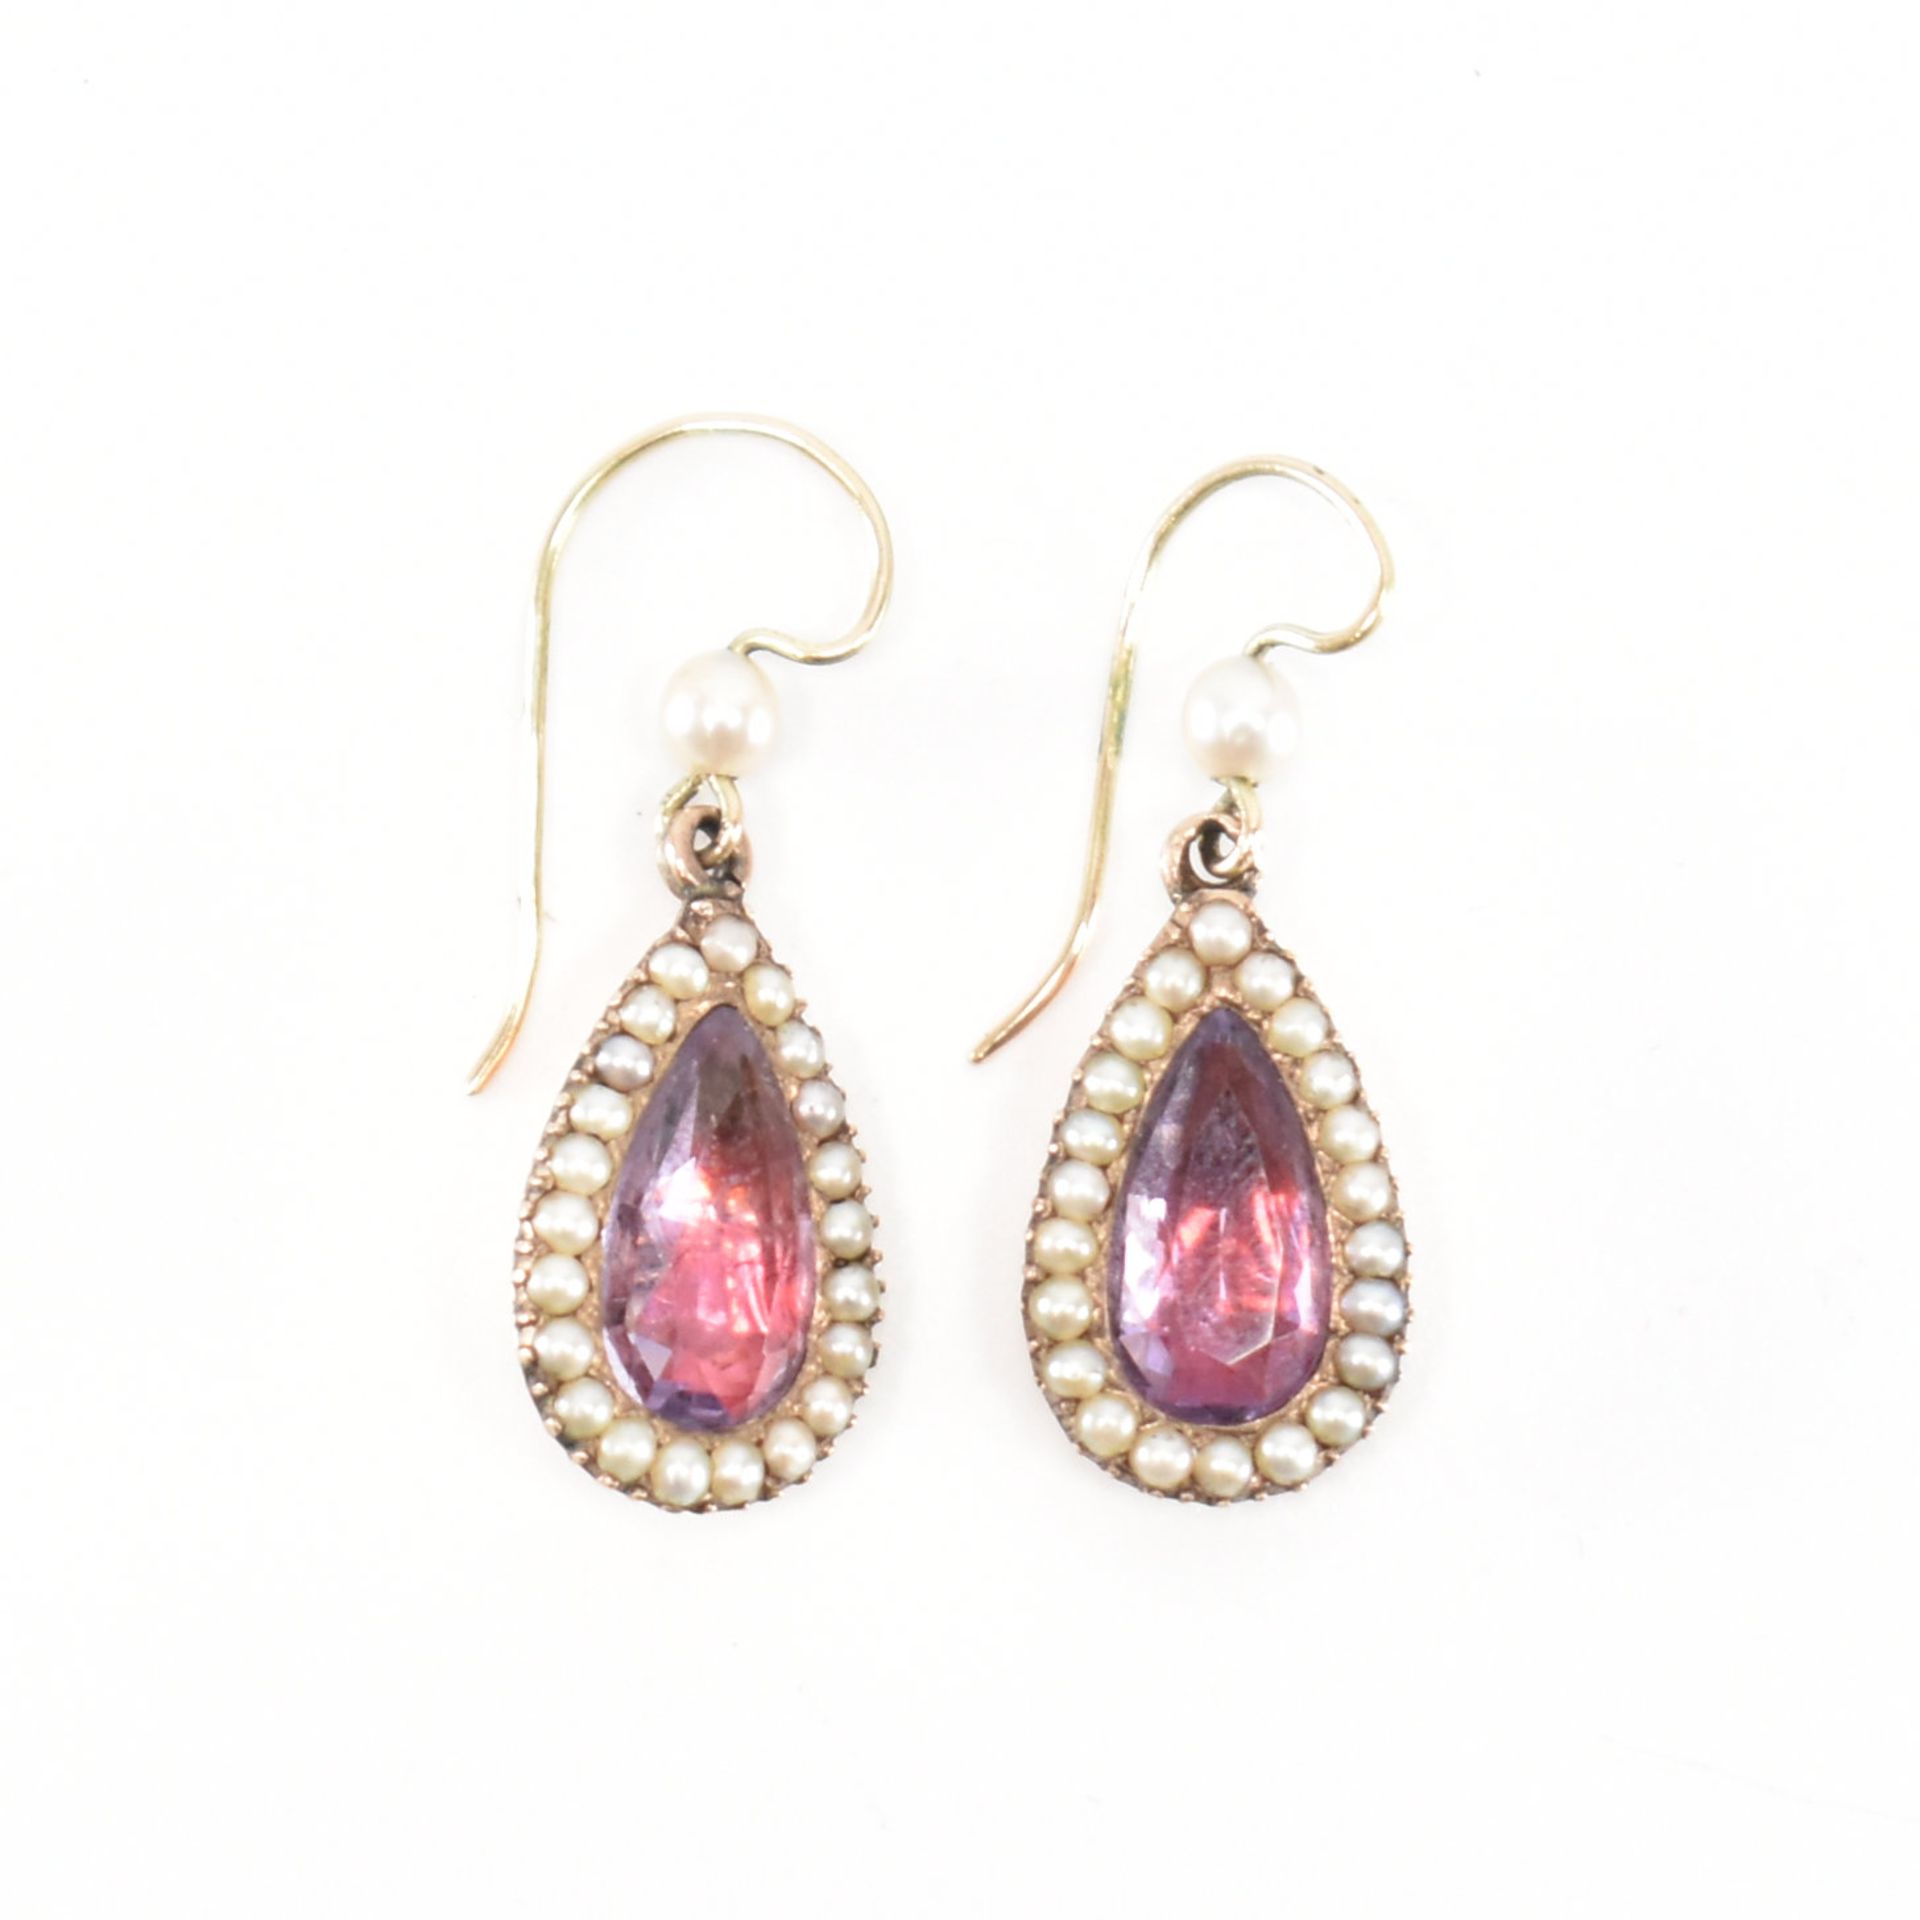 PAIR OF ANTIQUE GOLD FOIL BACK CRYSTAL DROP EARRINGS